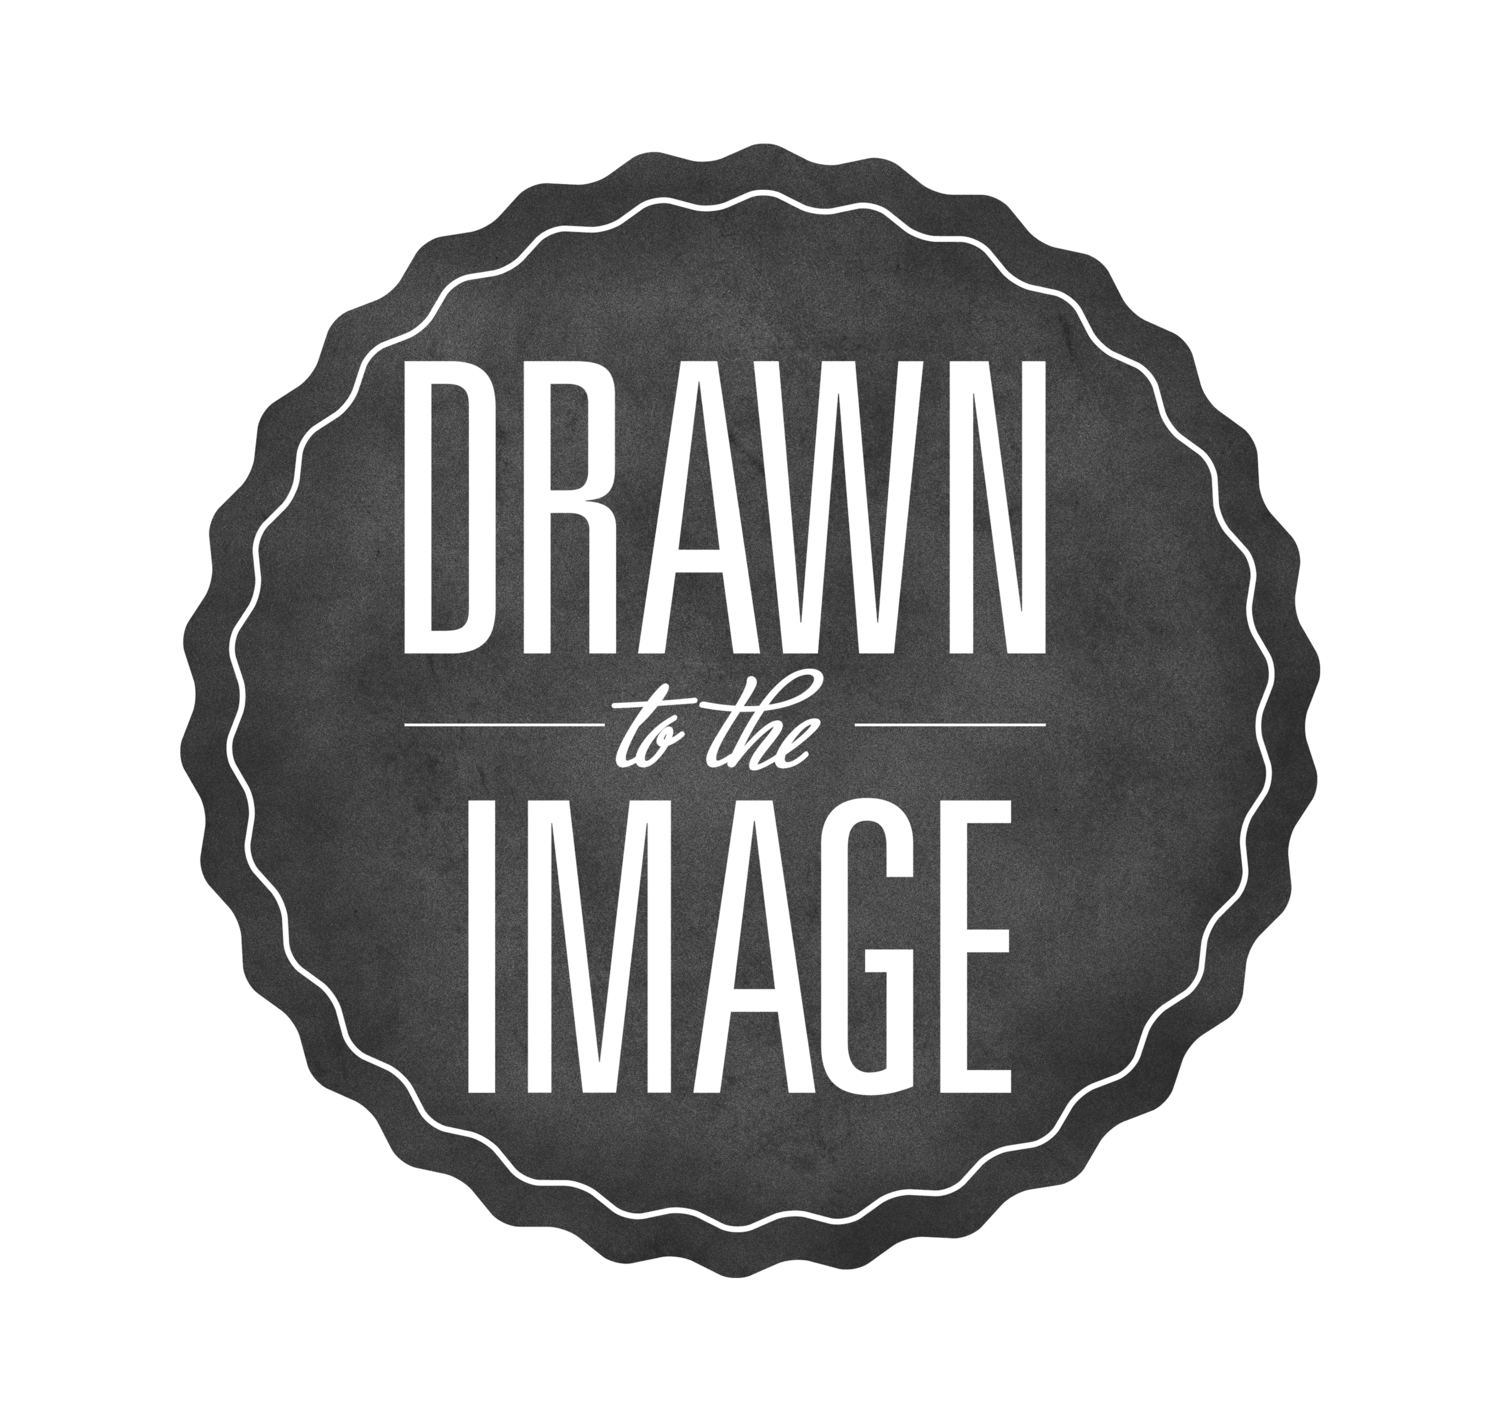 Drawn To The Image